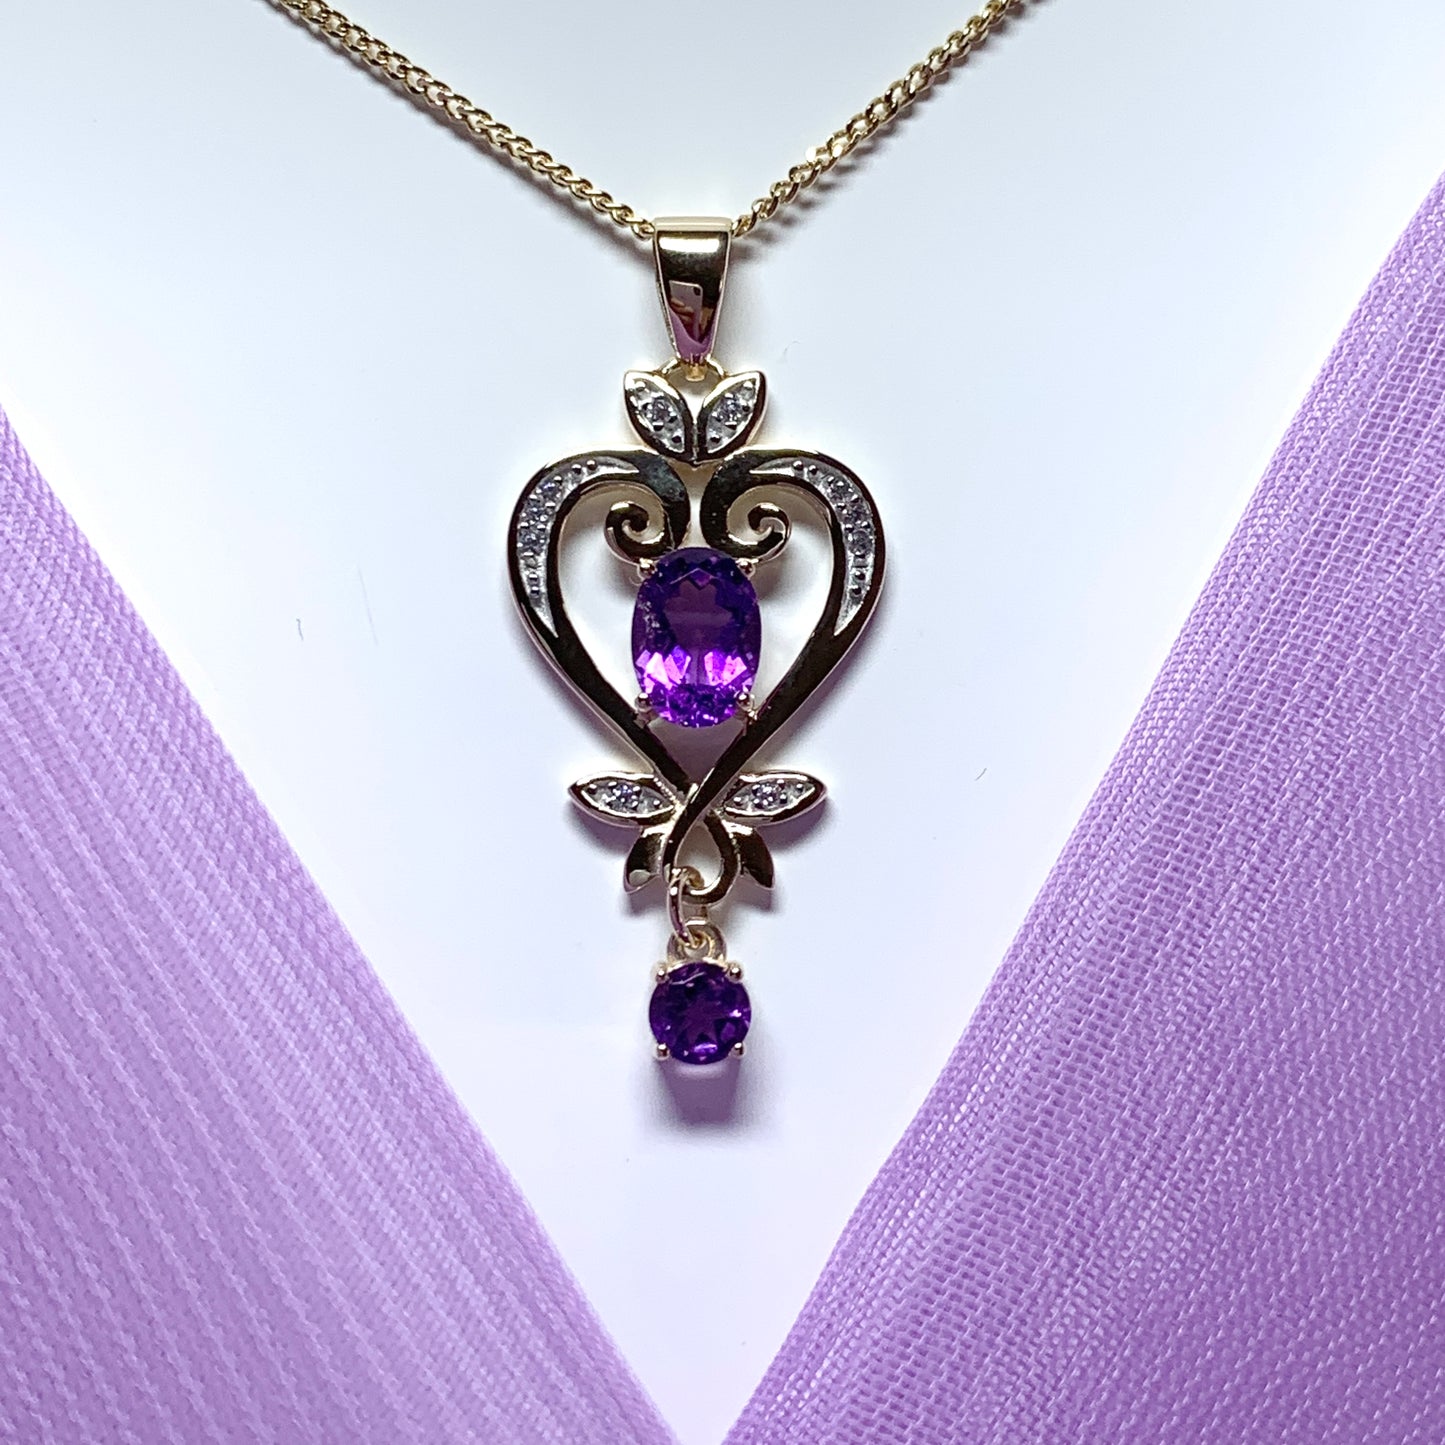 Heart shaped yellow gold and amethyst necklace pendentHeart shaped yellow gold and amethyst necklace pendent